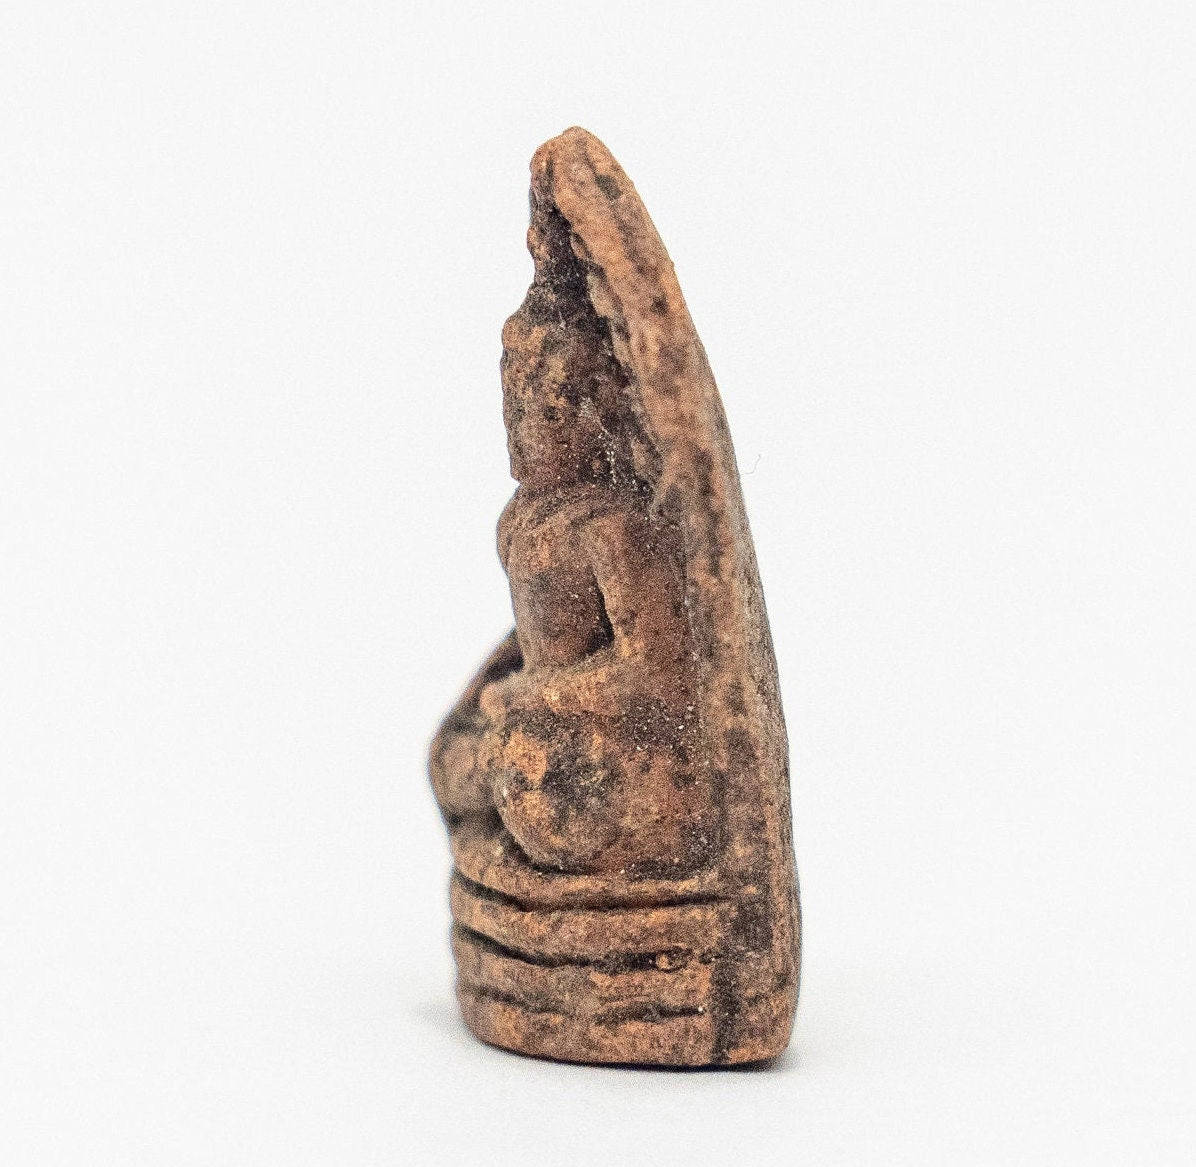 Authentic Ancient Thai Buddhist Amulet - Lamphun Region - Religious Amulet Buddhist Antique - Clay - 800 to 1200 Years Old - Thailand